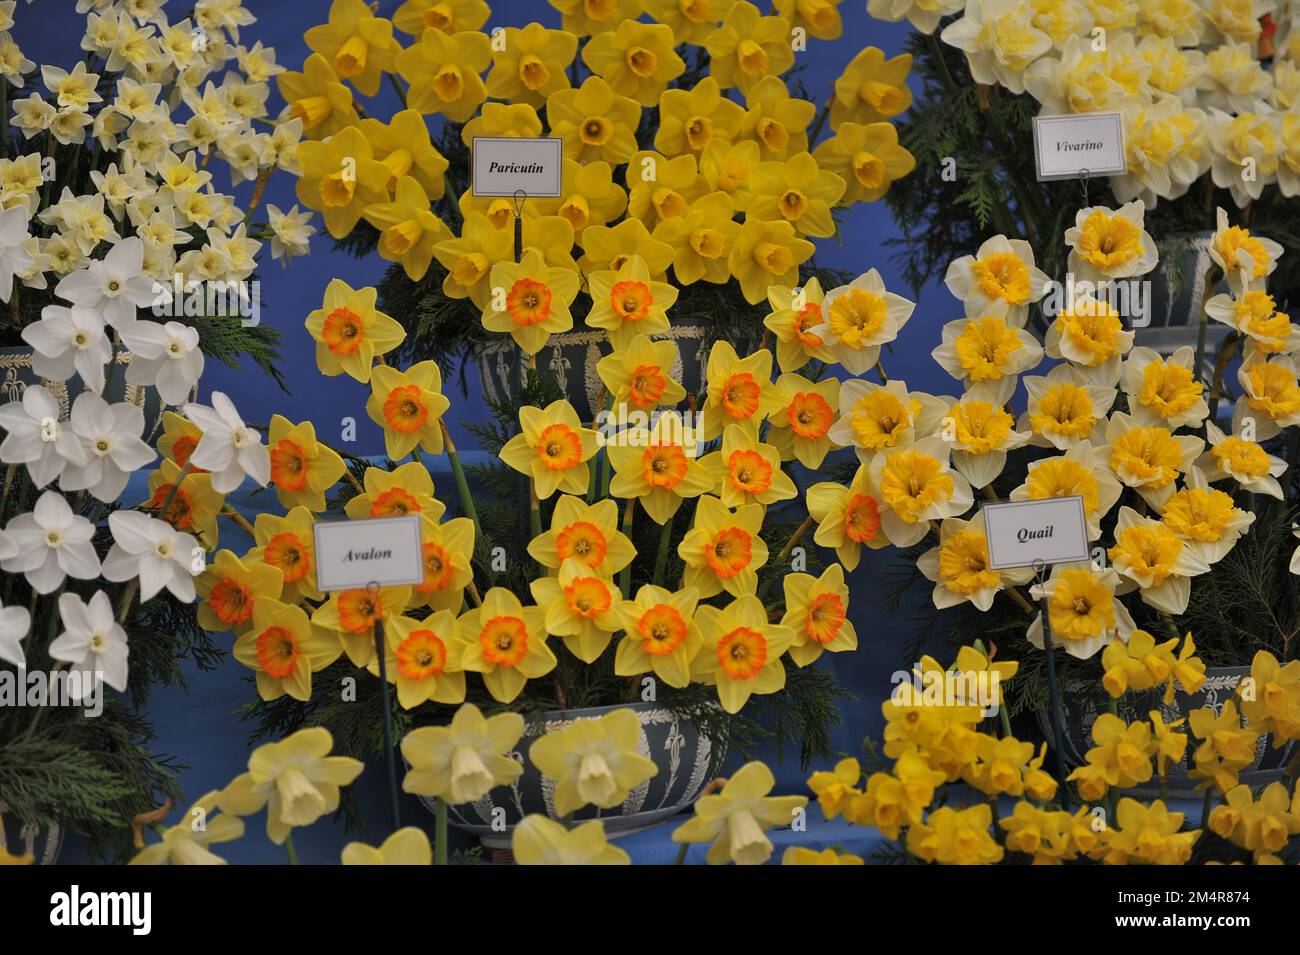 A bouquet of yellow and orange Large-Cupped daffodils (Narcissus) Paricutin on an exhibition in May Stock Photo